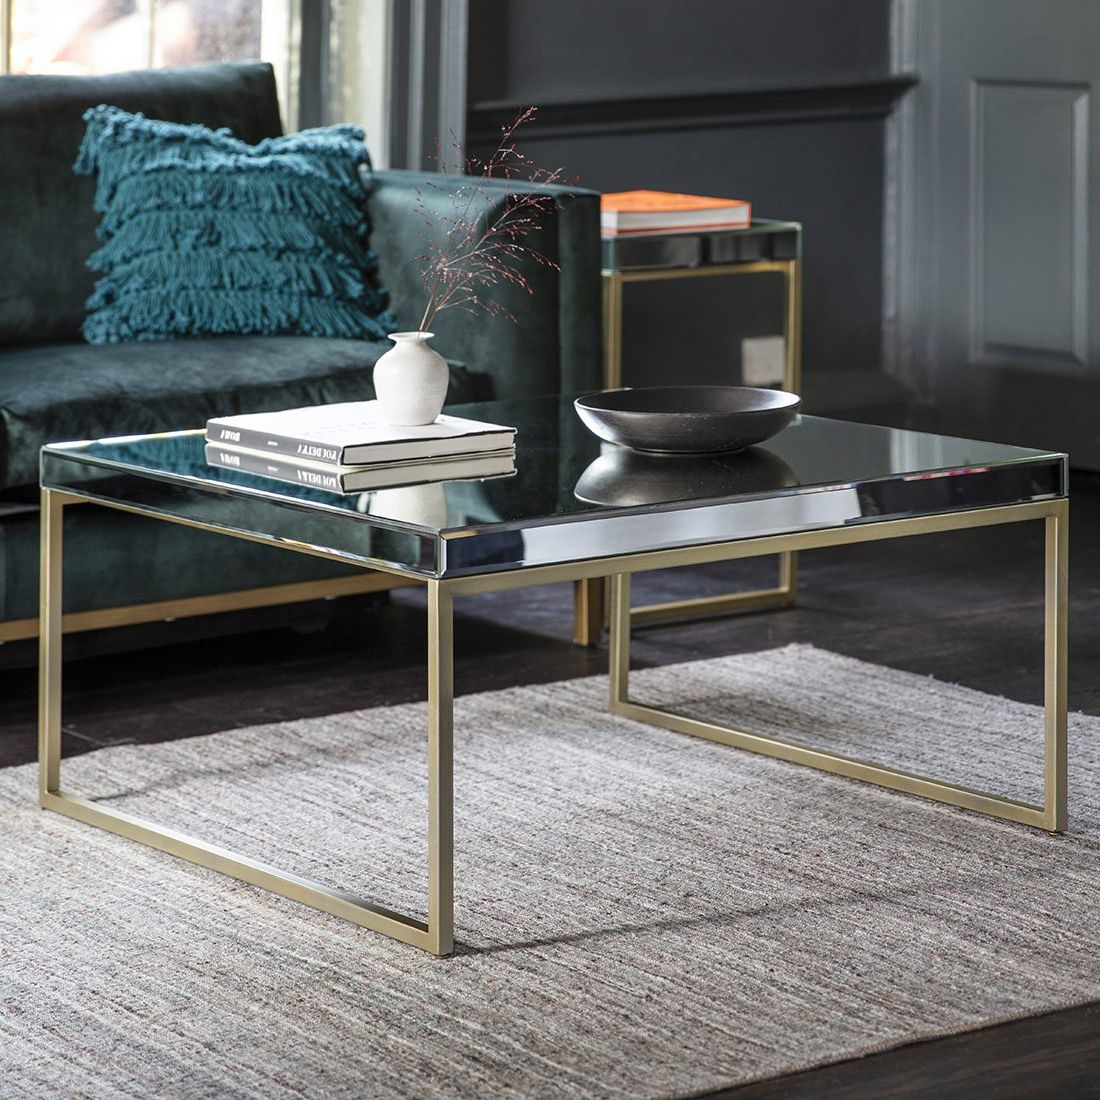 Champagne Gold Mirrored Coffee Table (View 9 of 10)